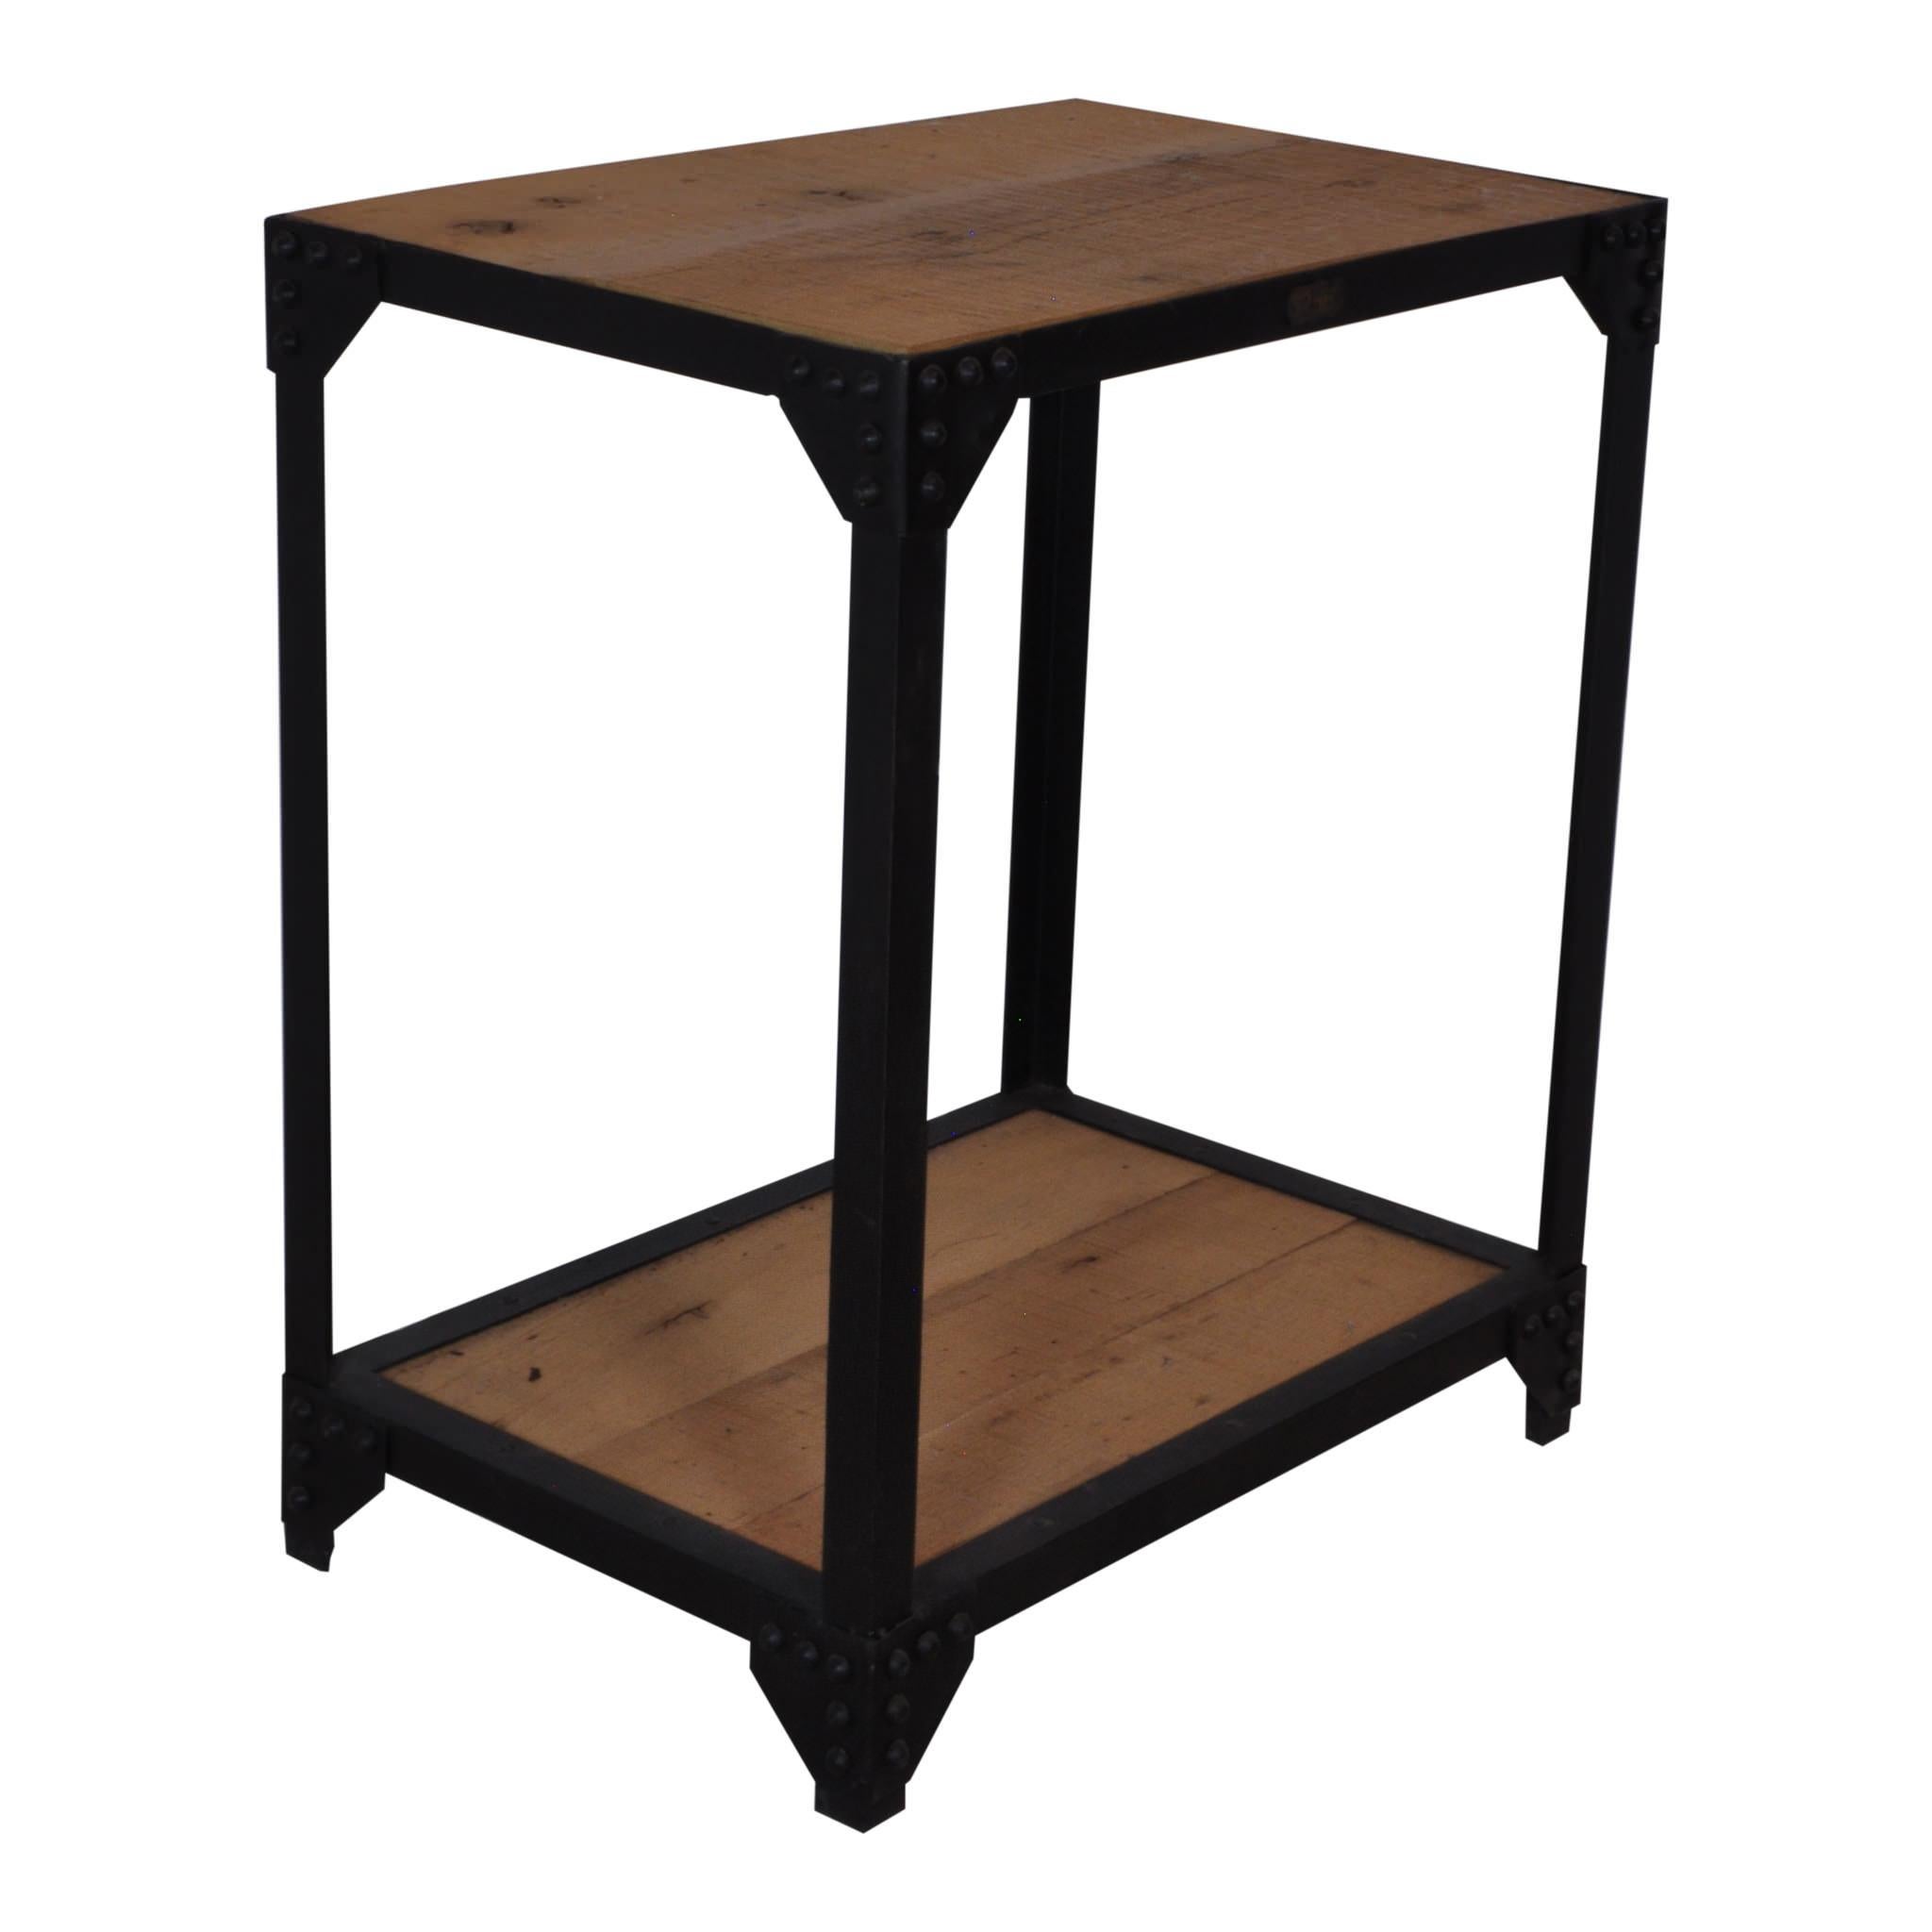 Heavy gauge steel frames this two tiered industrial end table. The table has reinforced corners with rivets, which add stability. The tabletop and lower tier have been replaced with new pine insets. A small plaque with the number 256 is affixed to